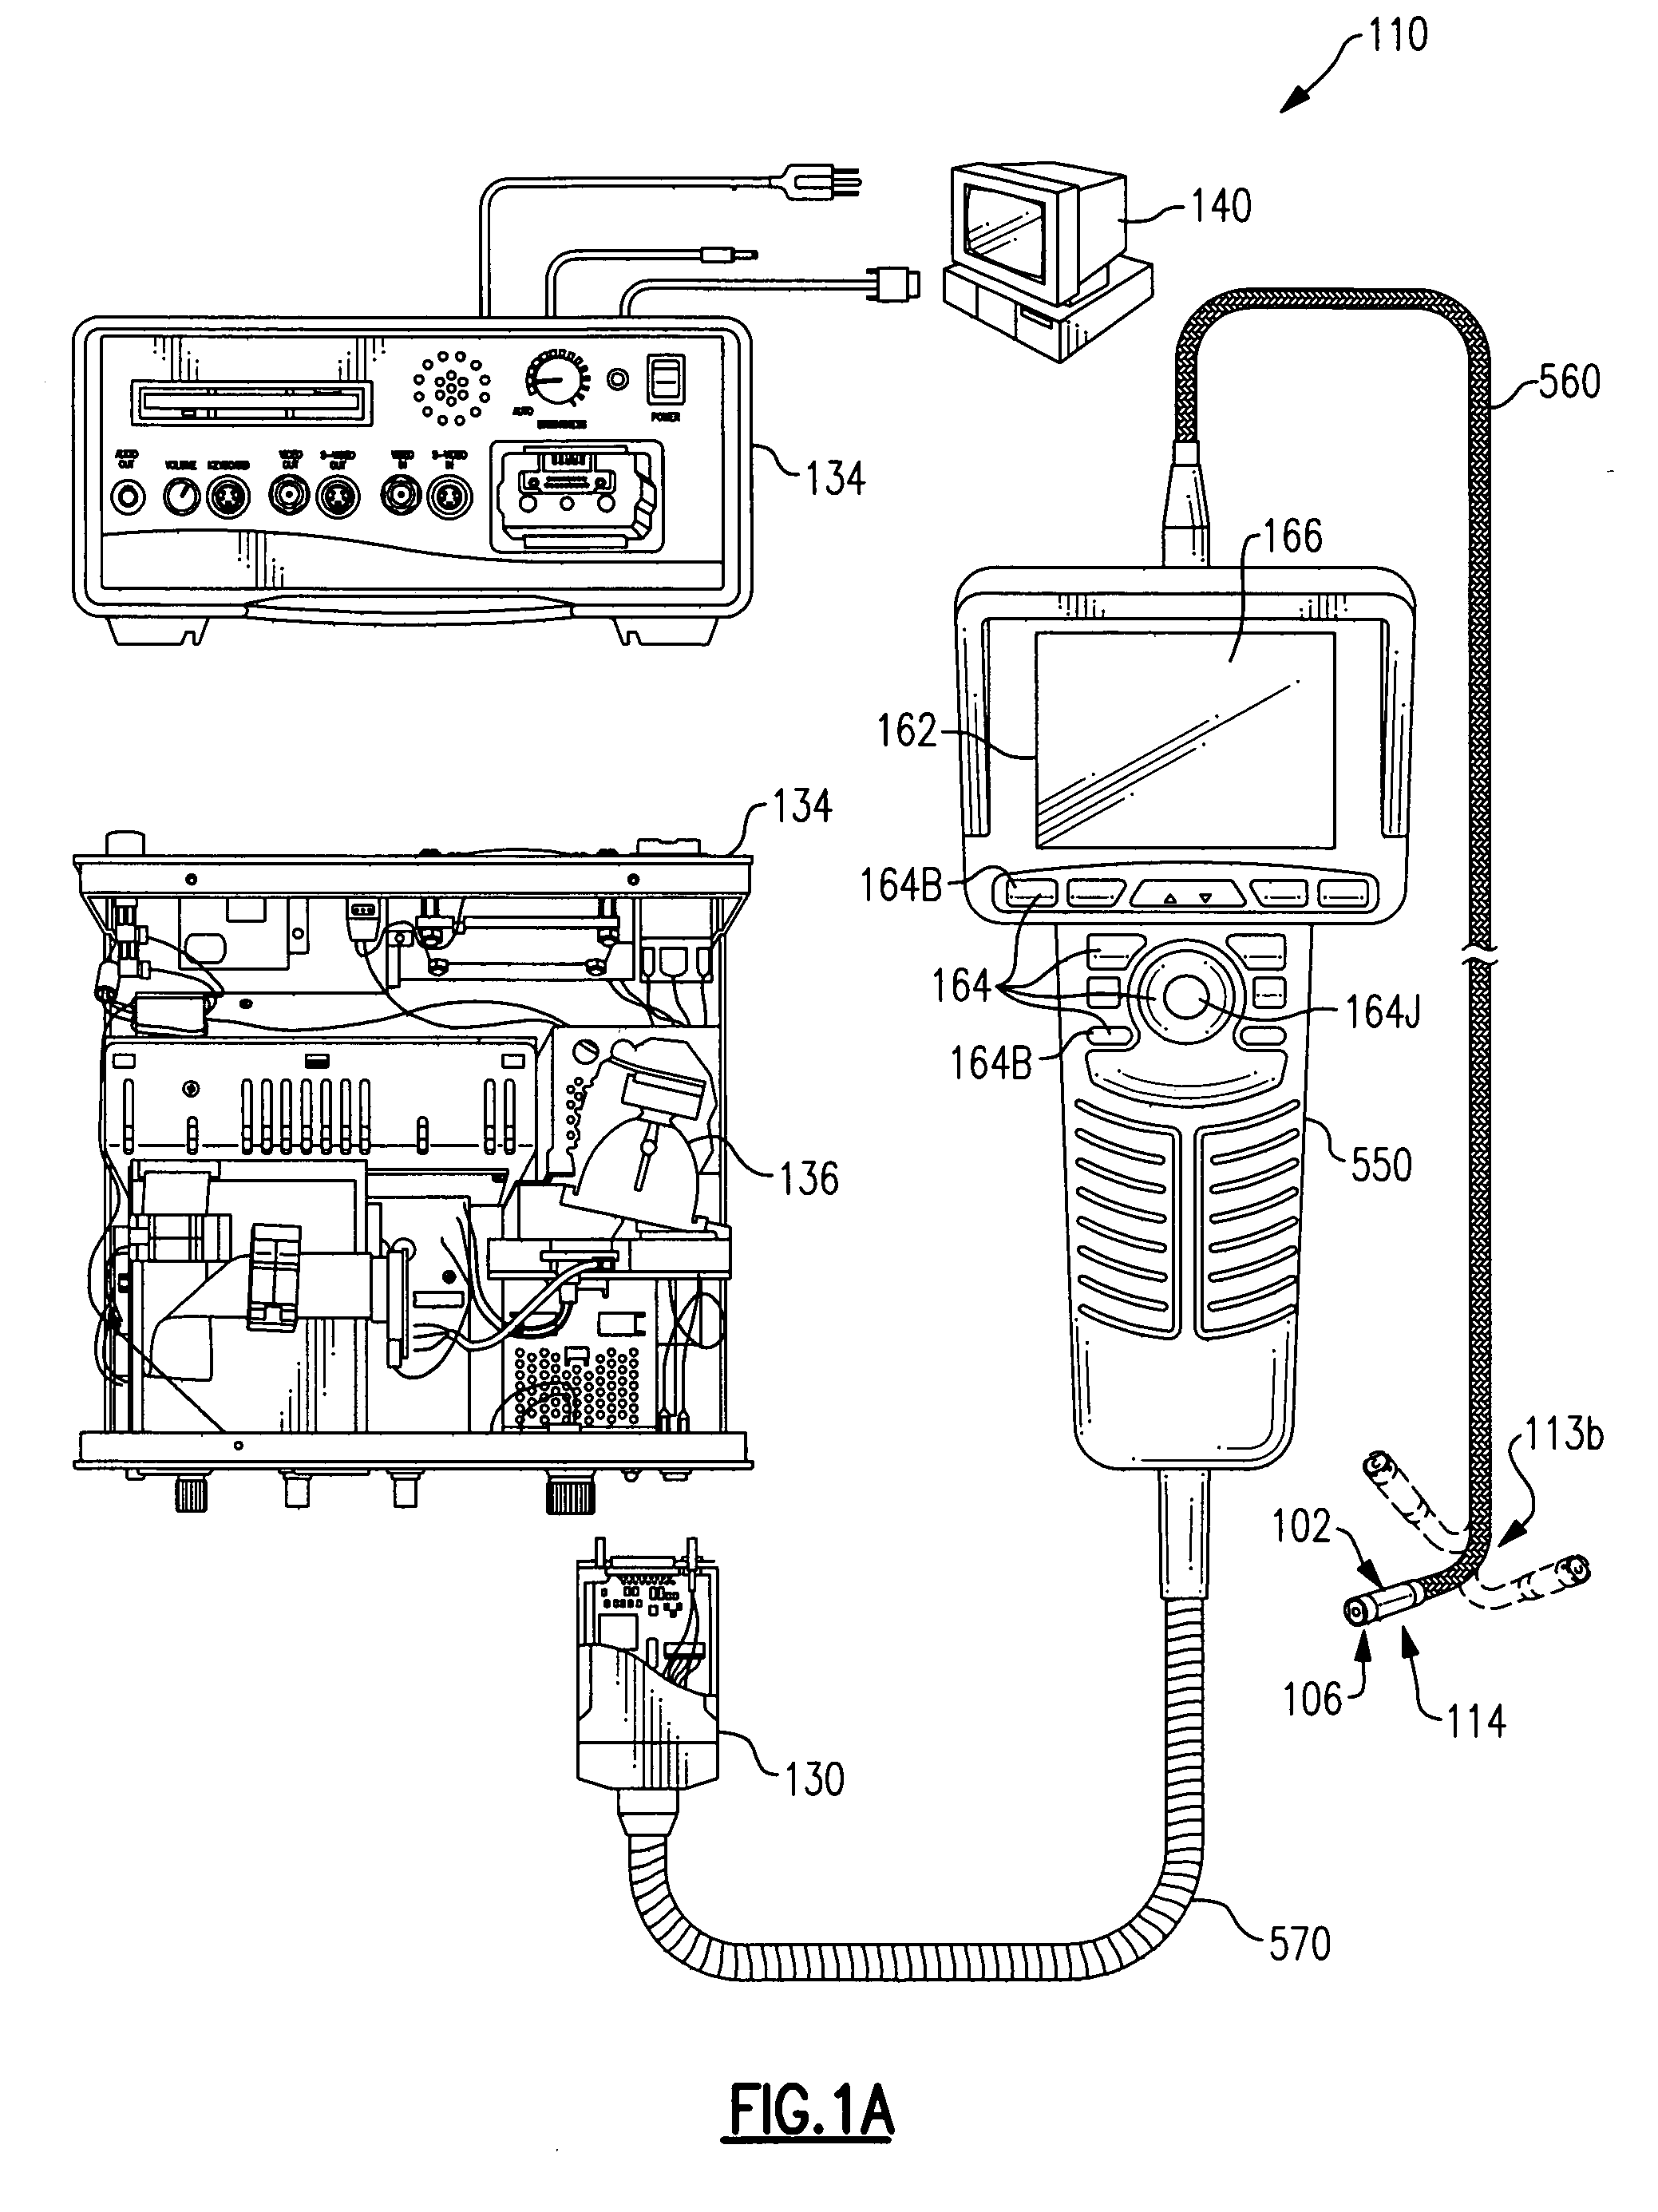 Remote video inspection system integrating audio communication functionality